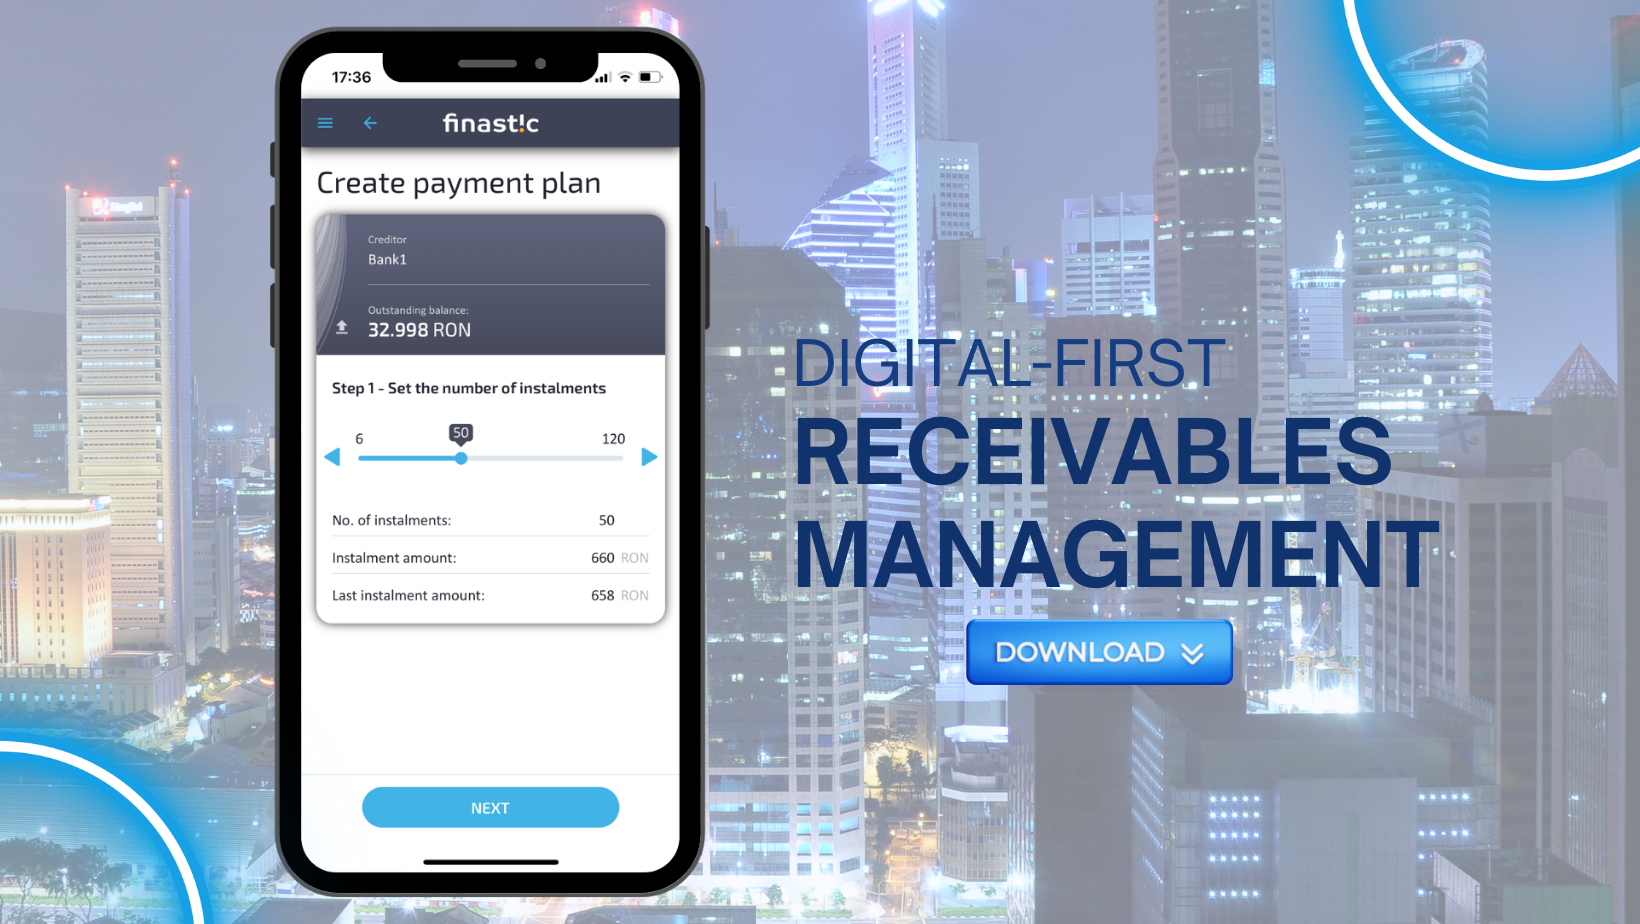 Digital-first receivables management - closer look at self-service functionality